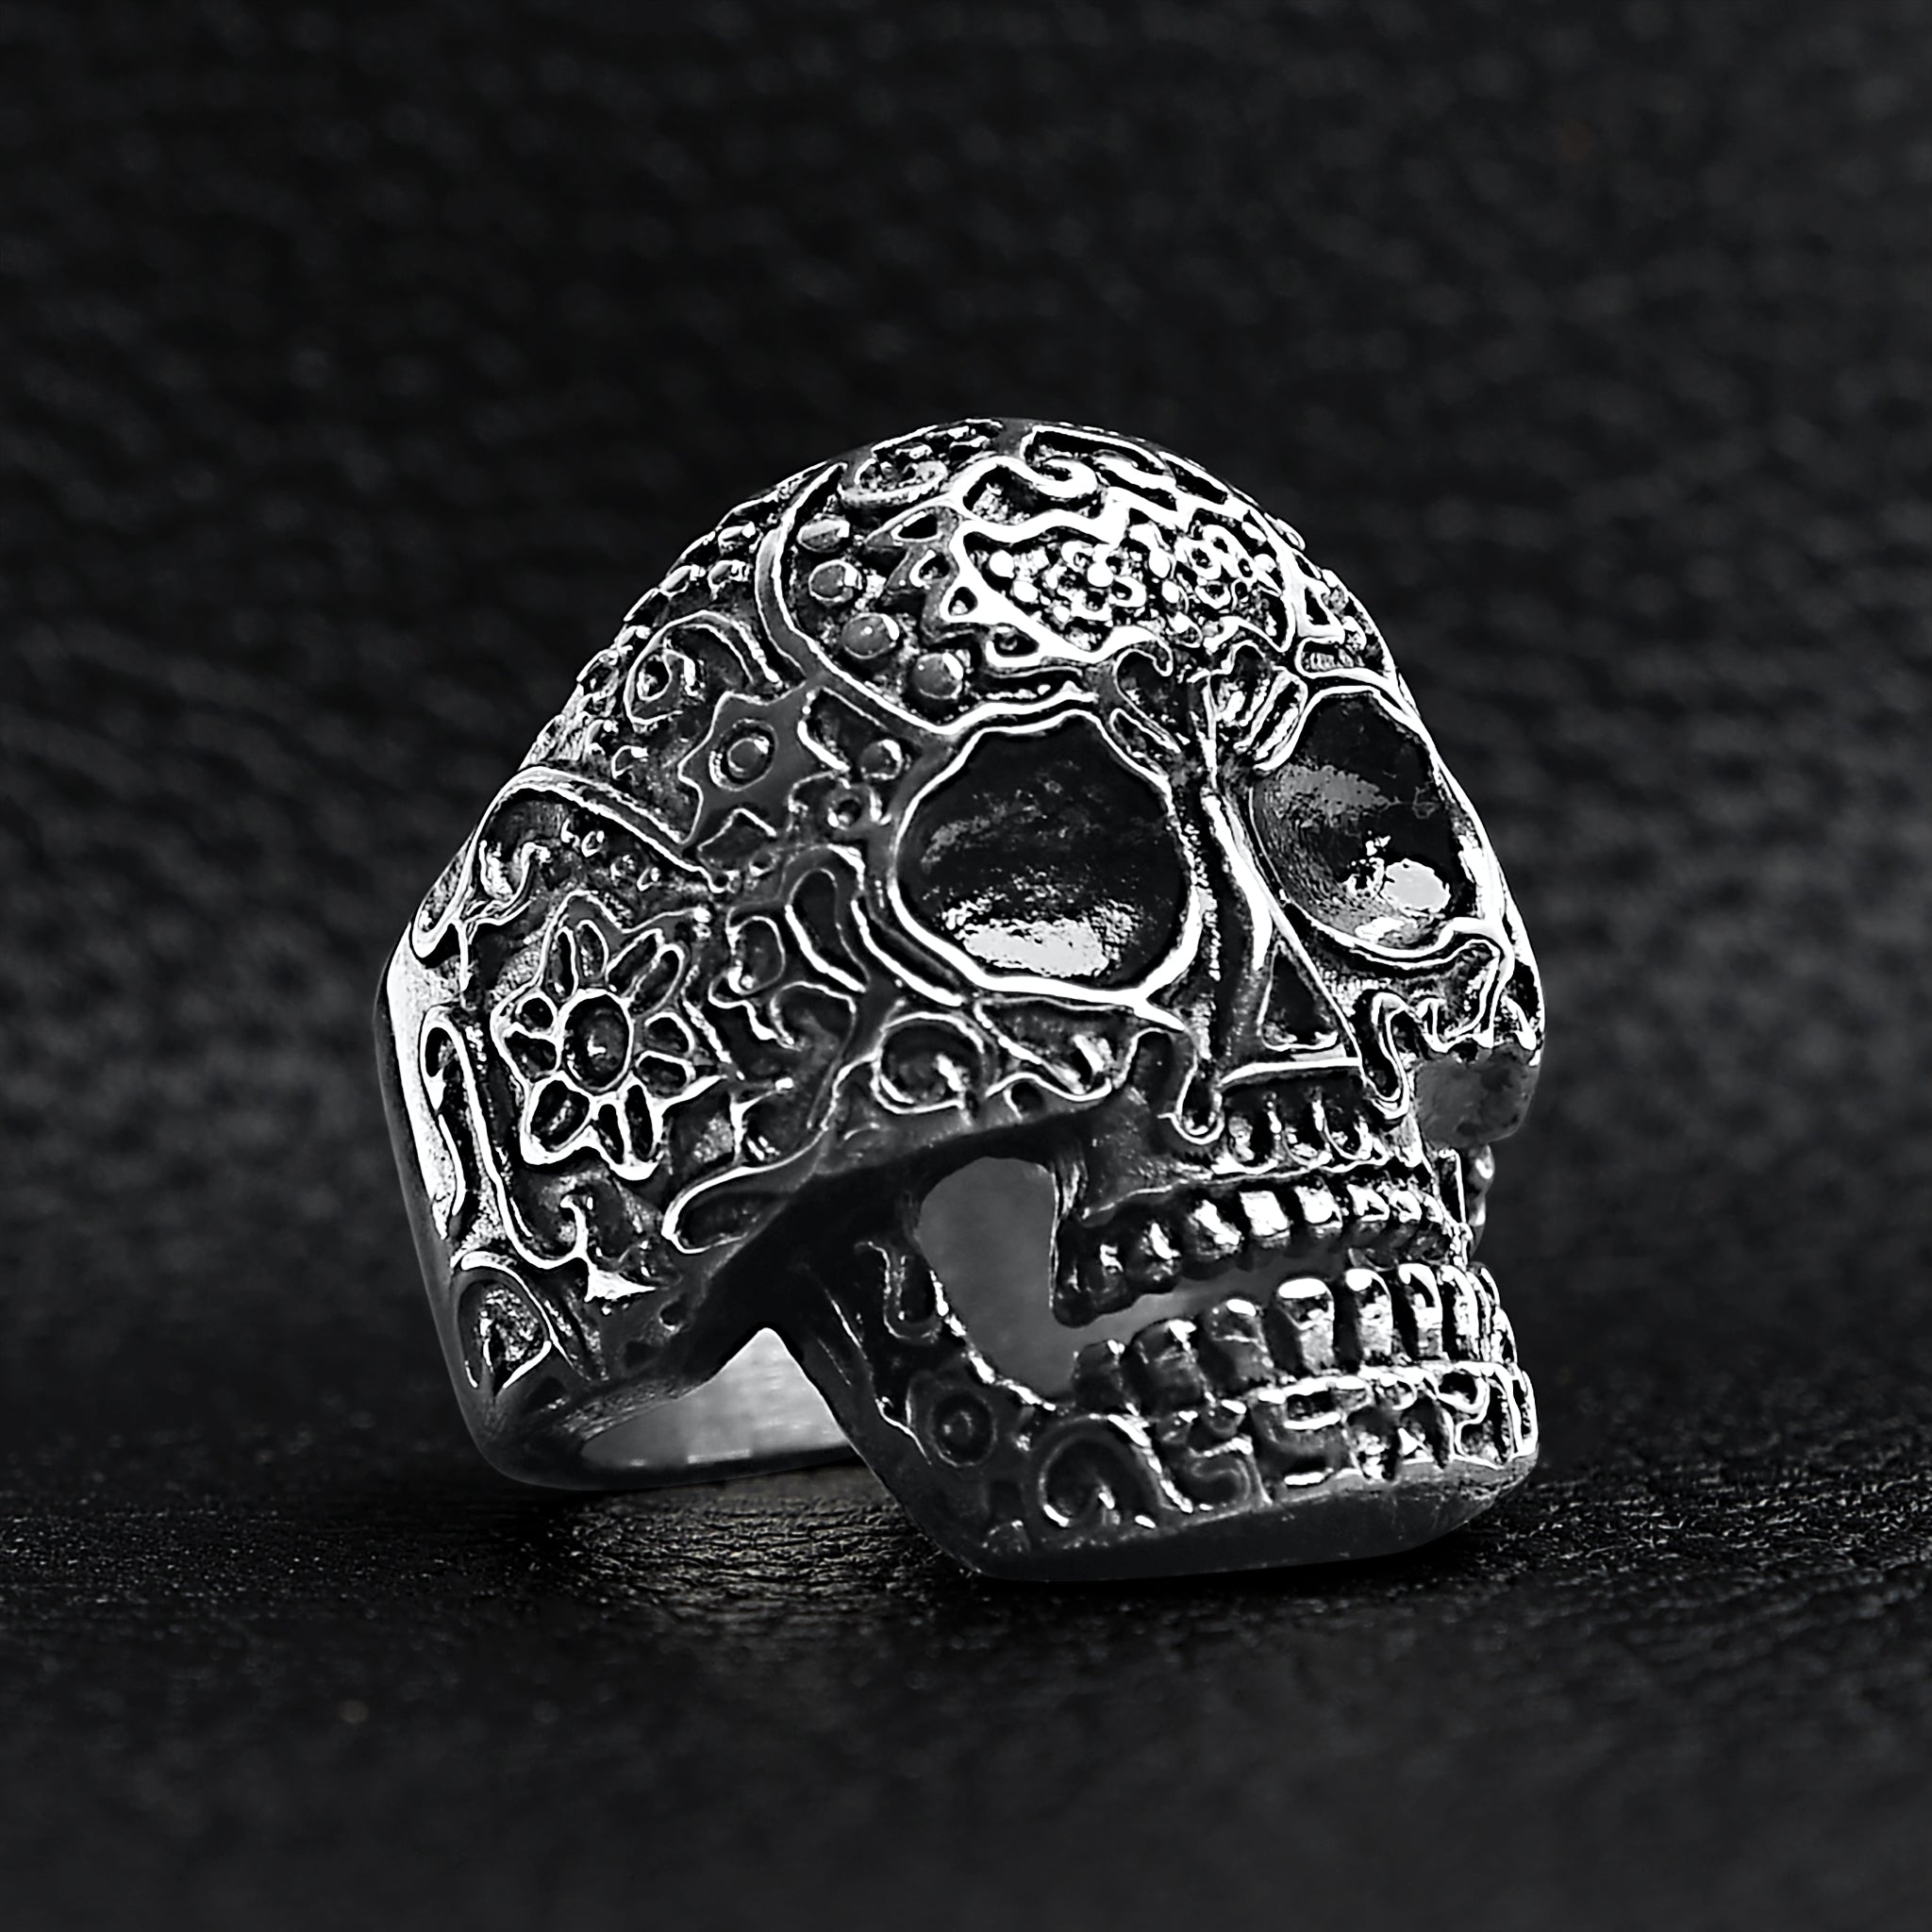 Detailed Skull Stainless Steel Ring - Durable and Hypoallergenic Jewelry for Men Bijou Her